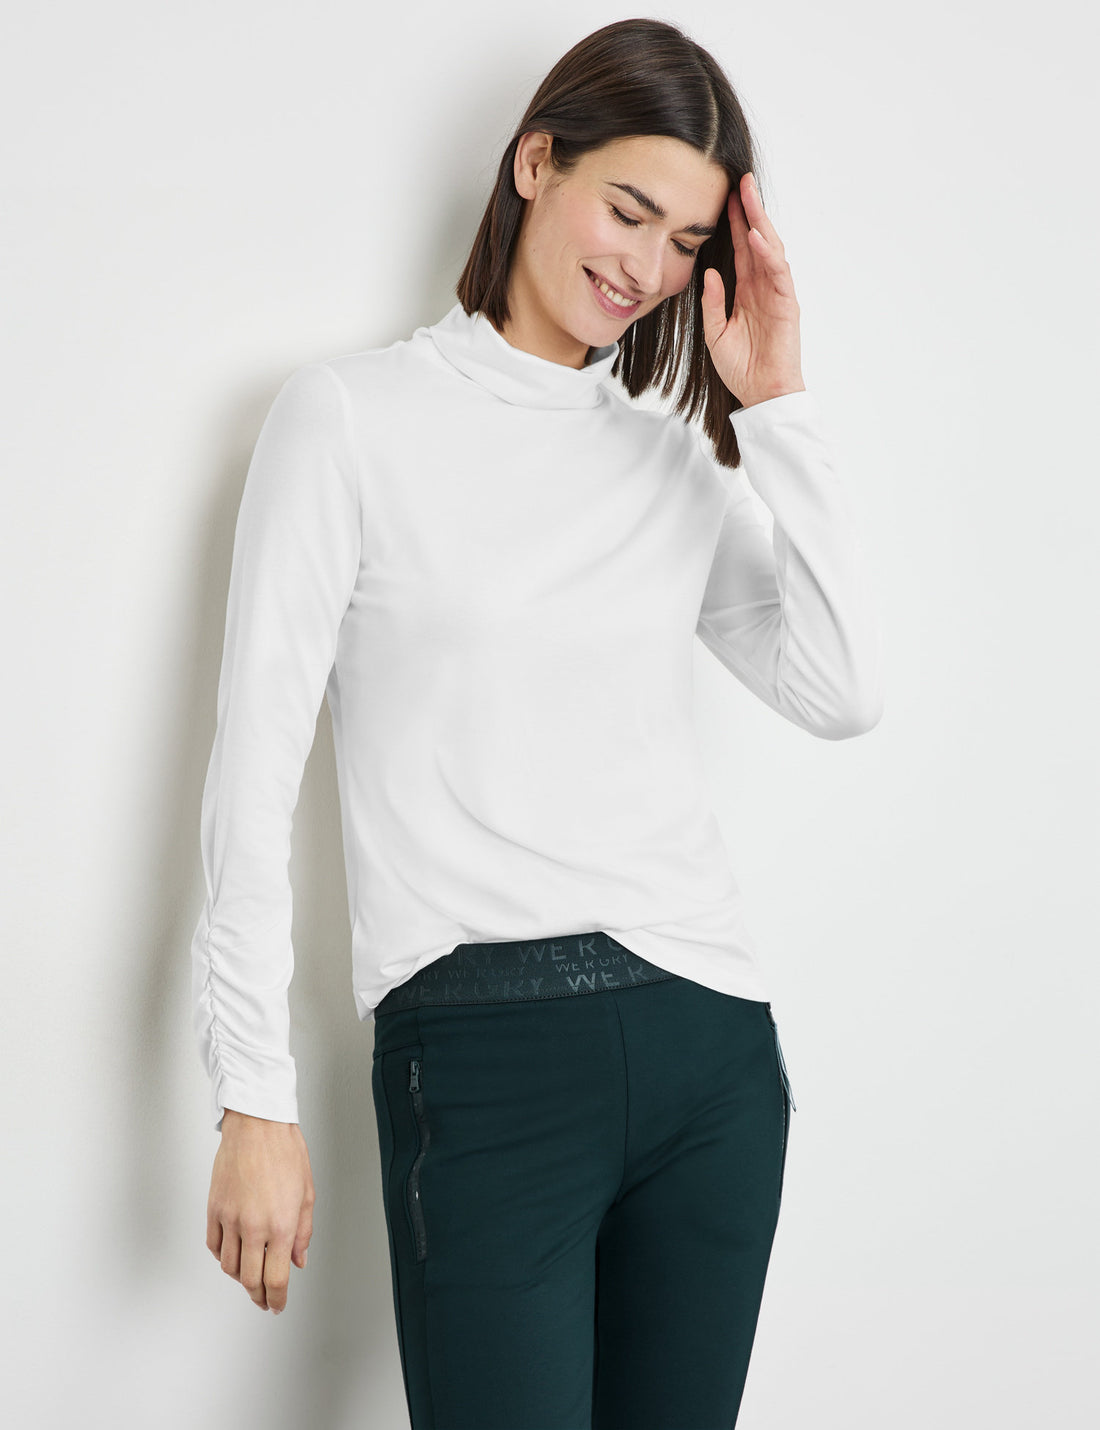 Long Sleeve Top With A Polo Collar And Gathers On The Sleeves_170144-44009_99700_01